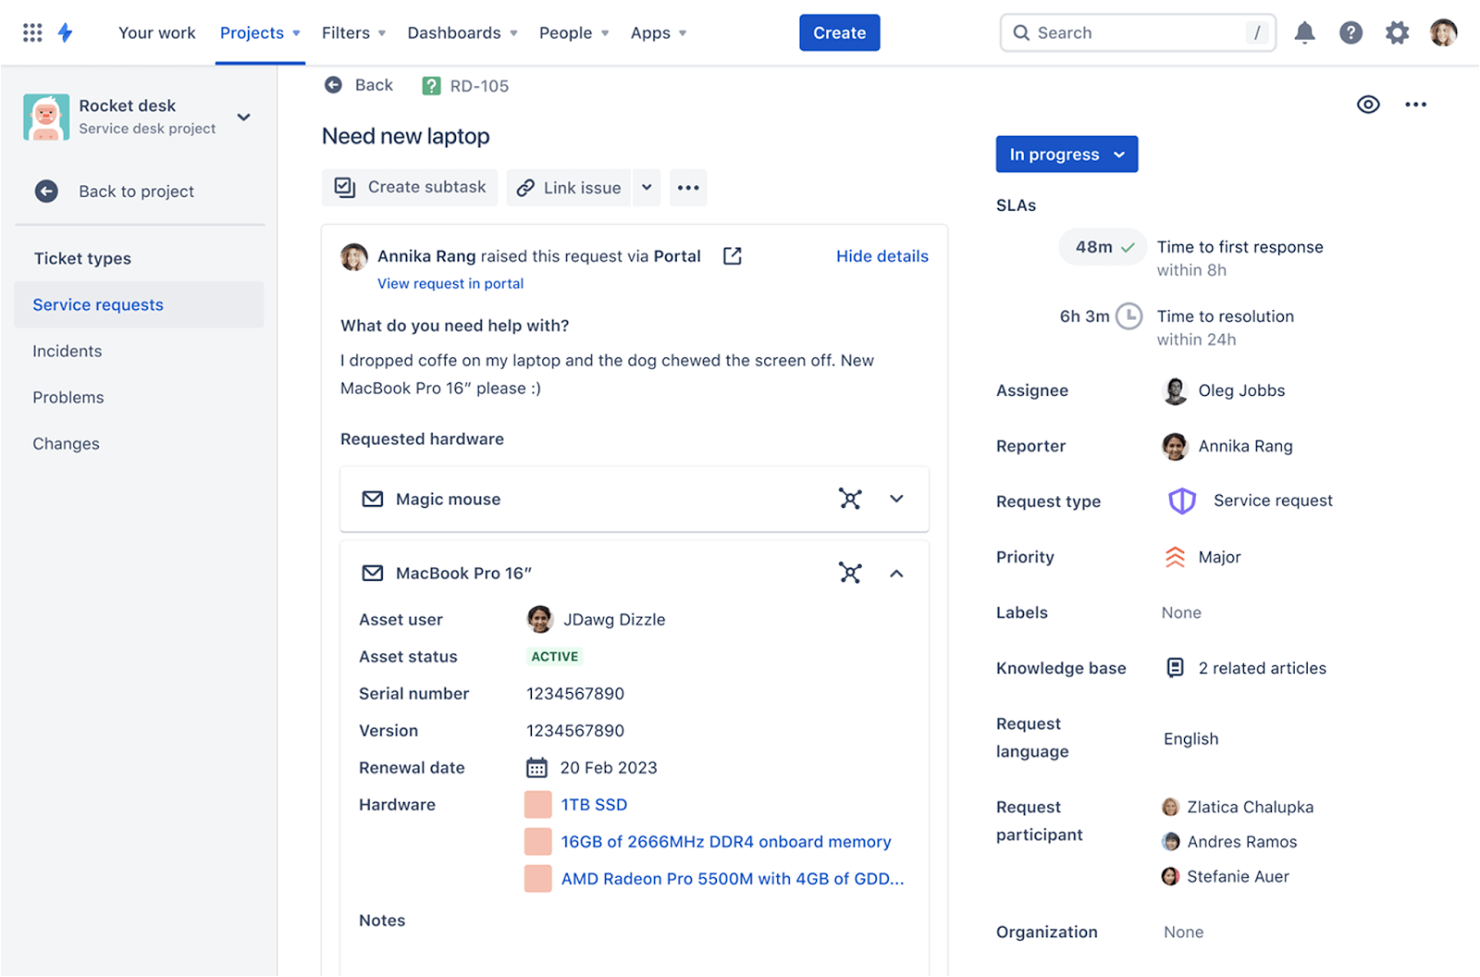 ITSM tool Jira Service Management's service requests